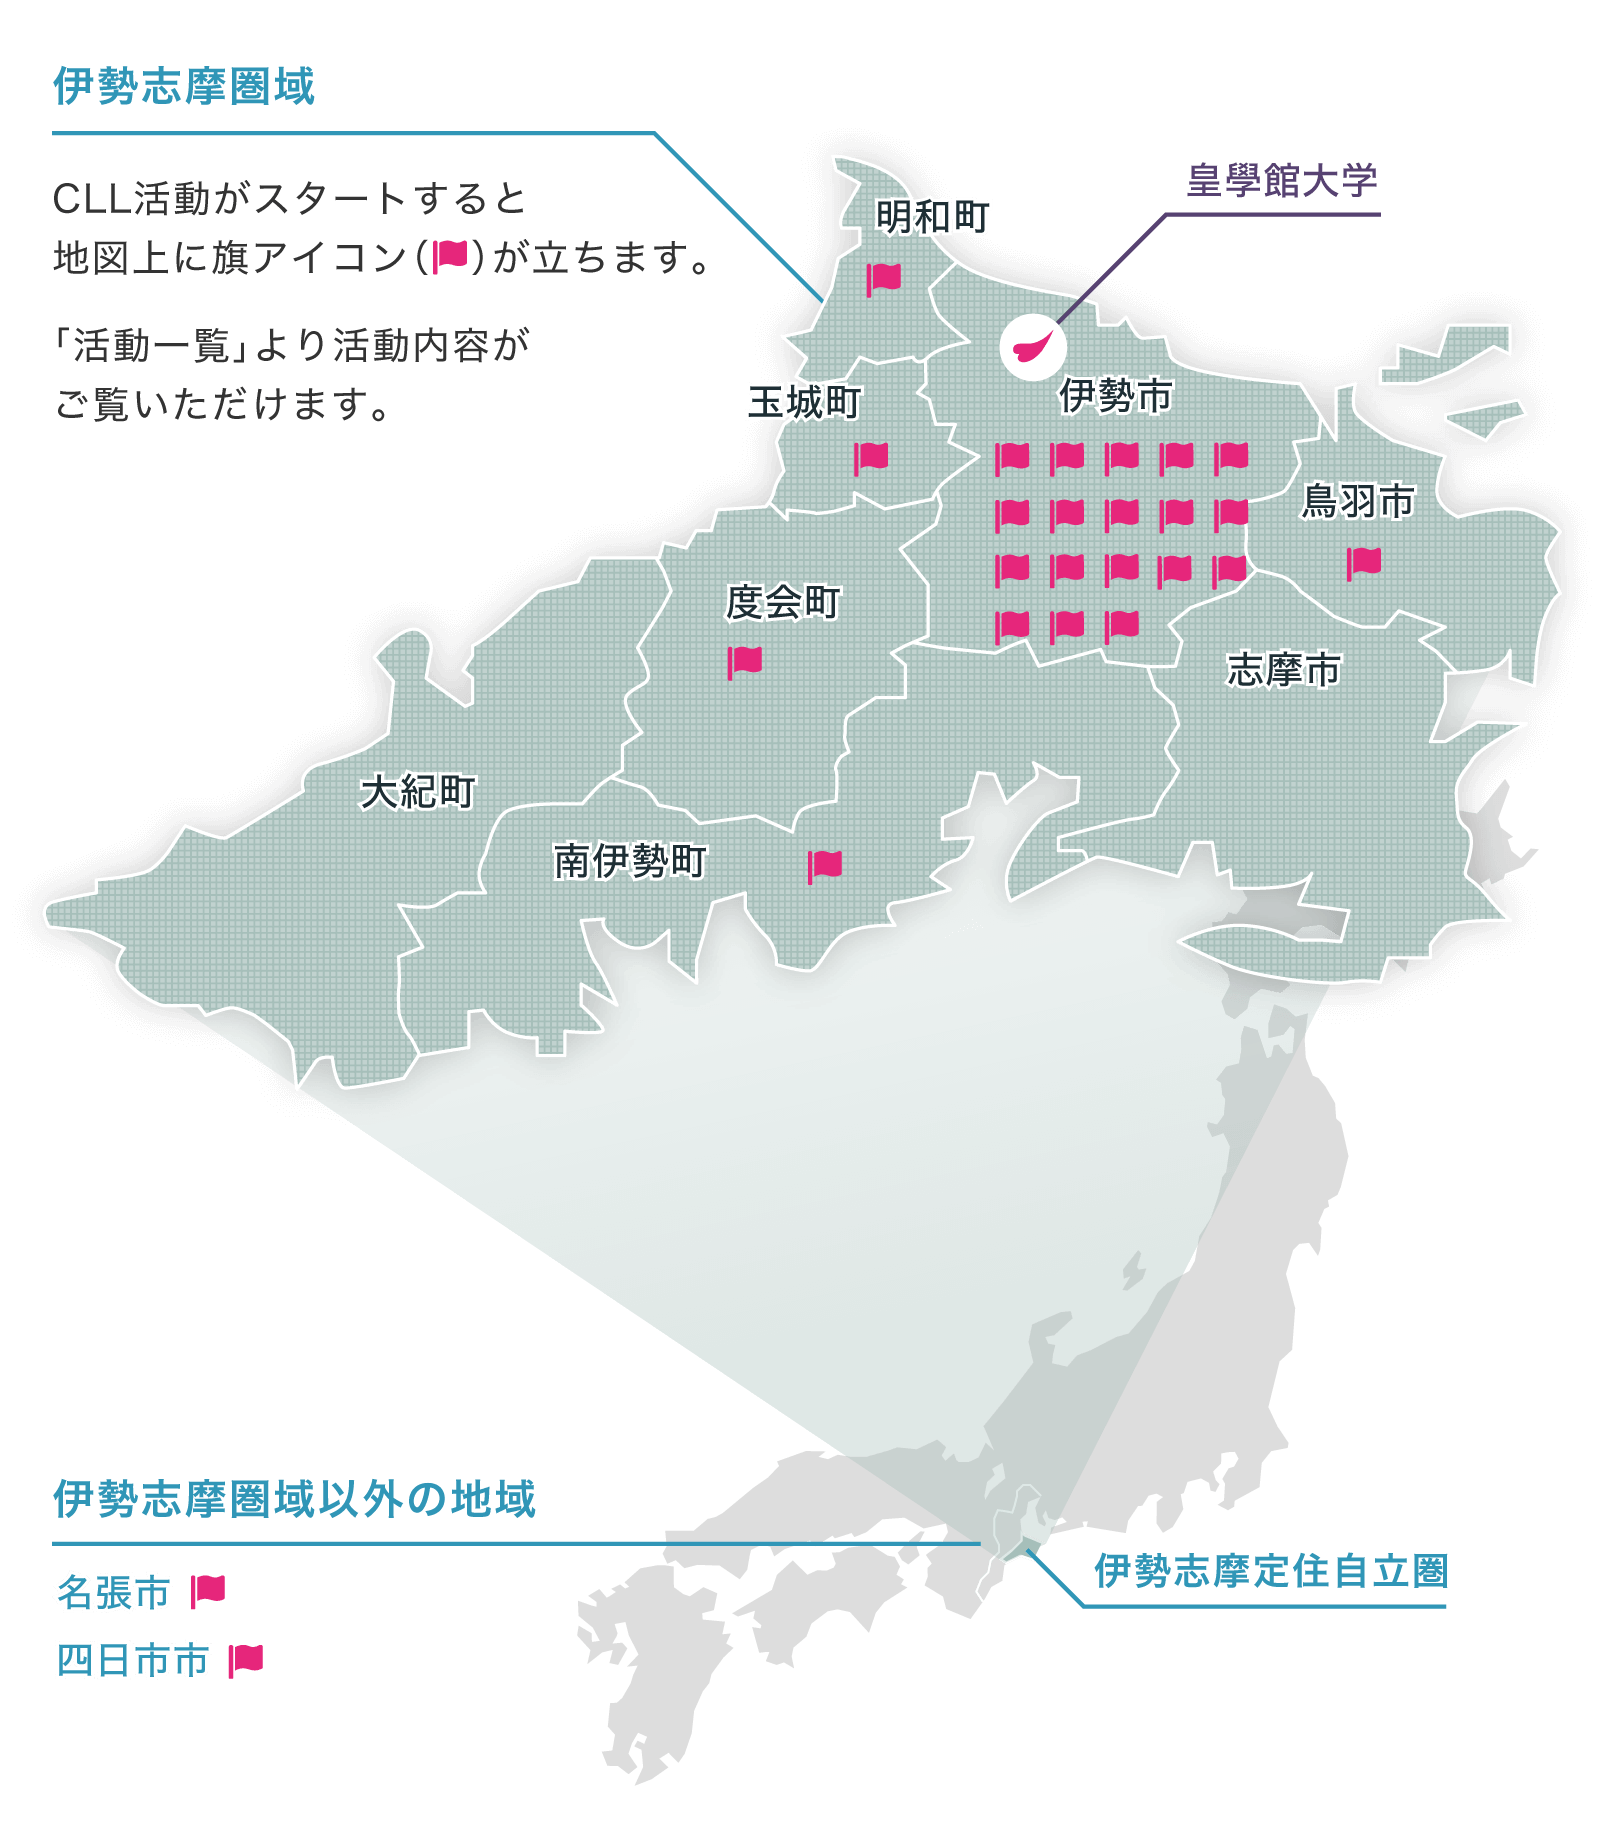 CLL活動MAP